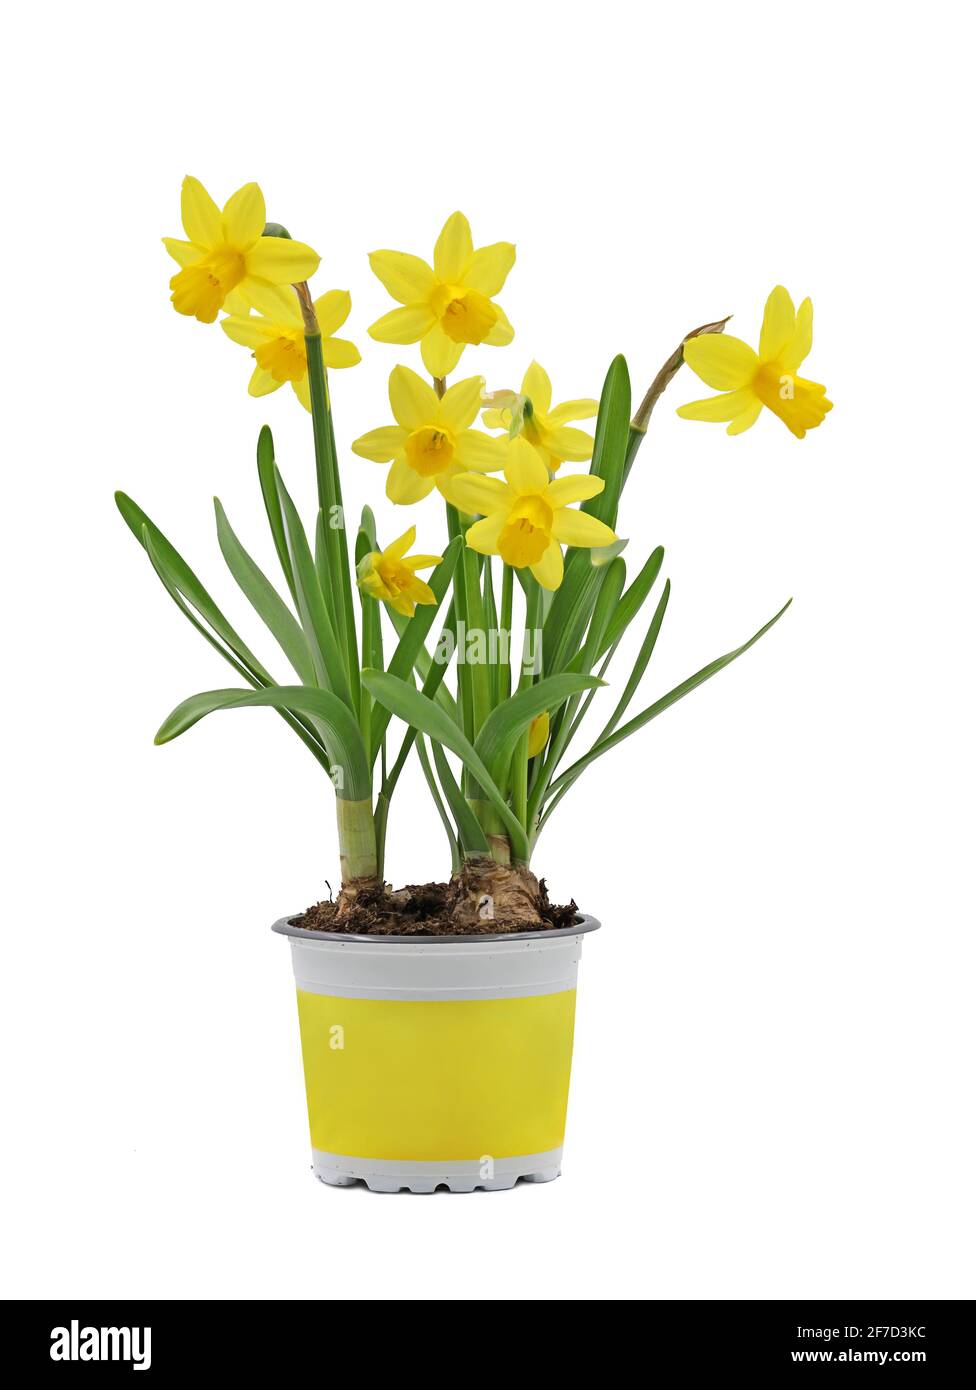 spring flower bulb, Narcissus cyclamineus in yellow pot isolated on white background Stock Photo